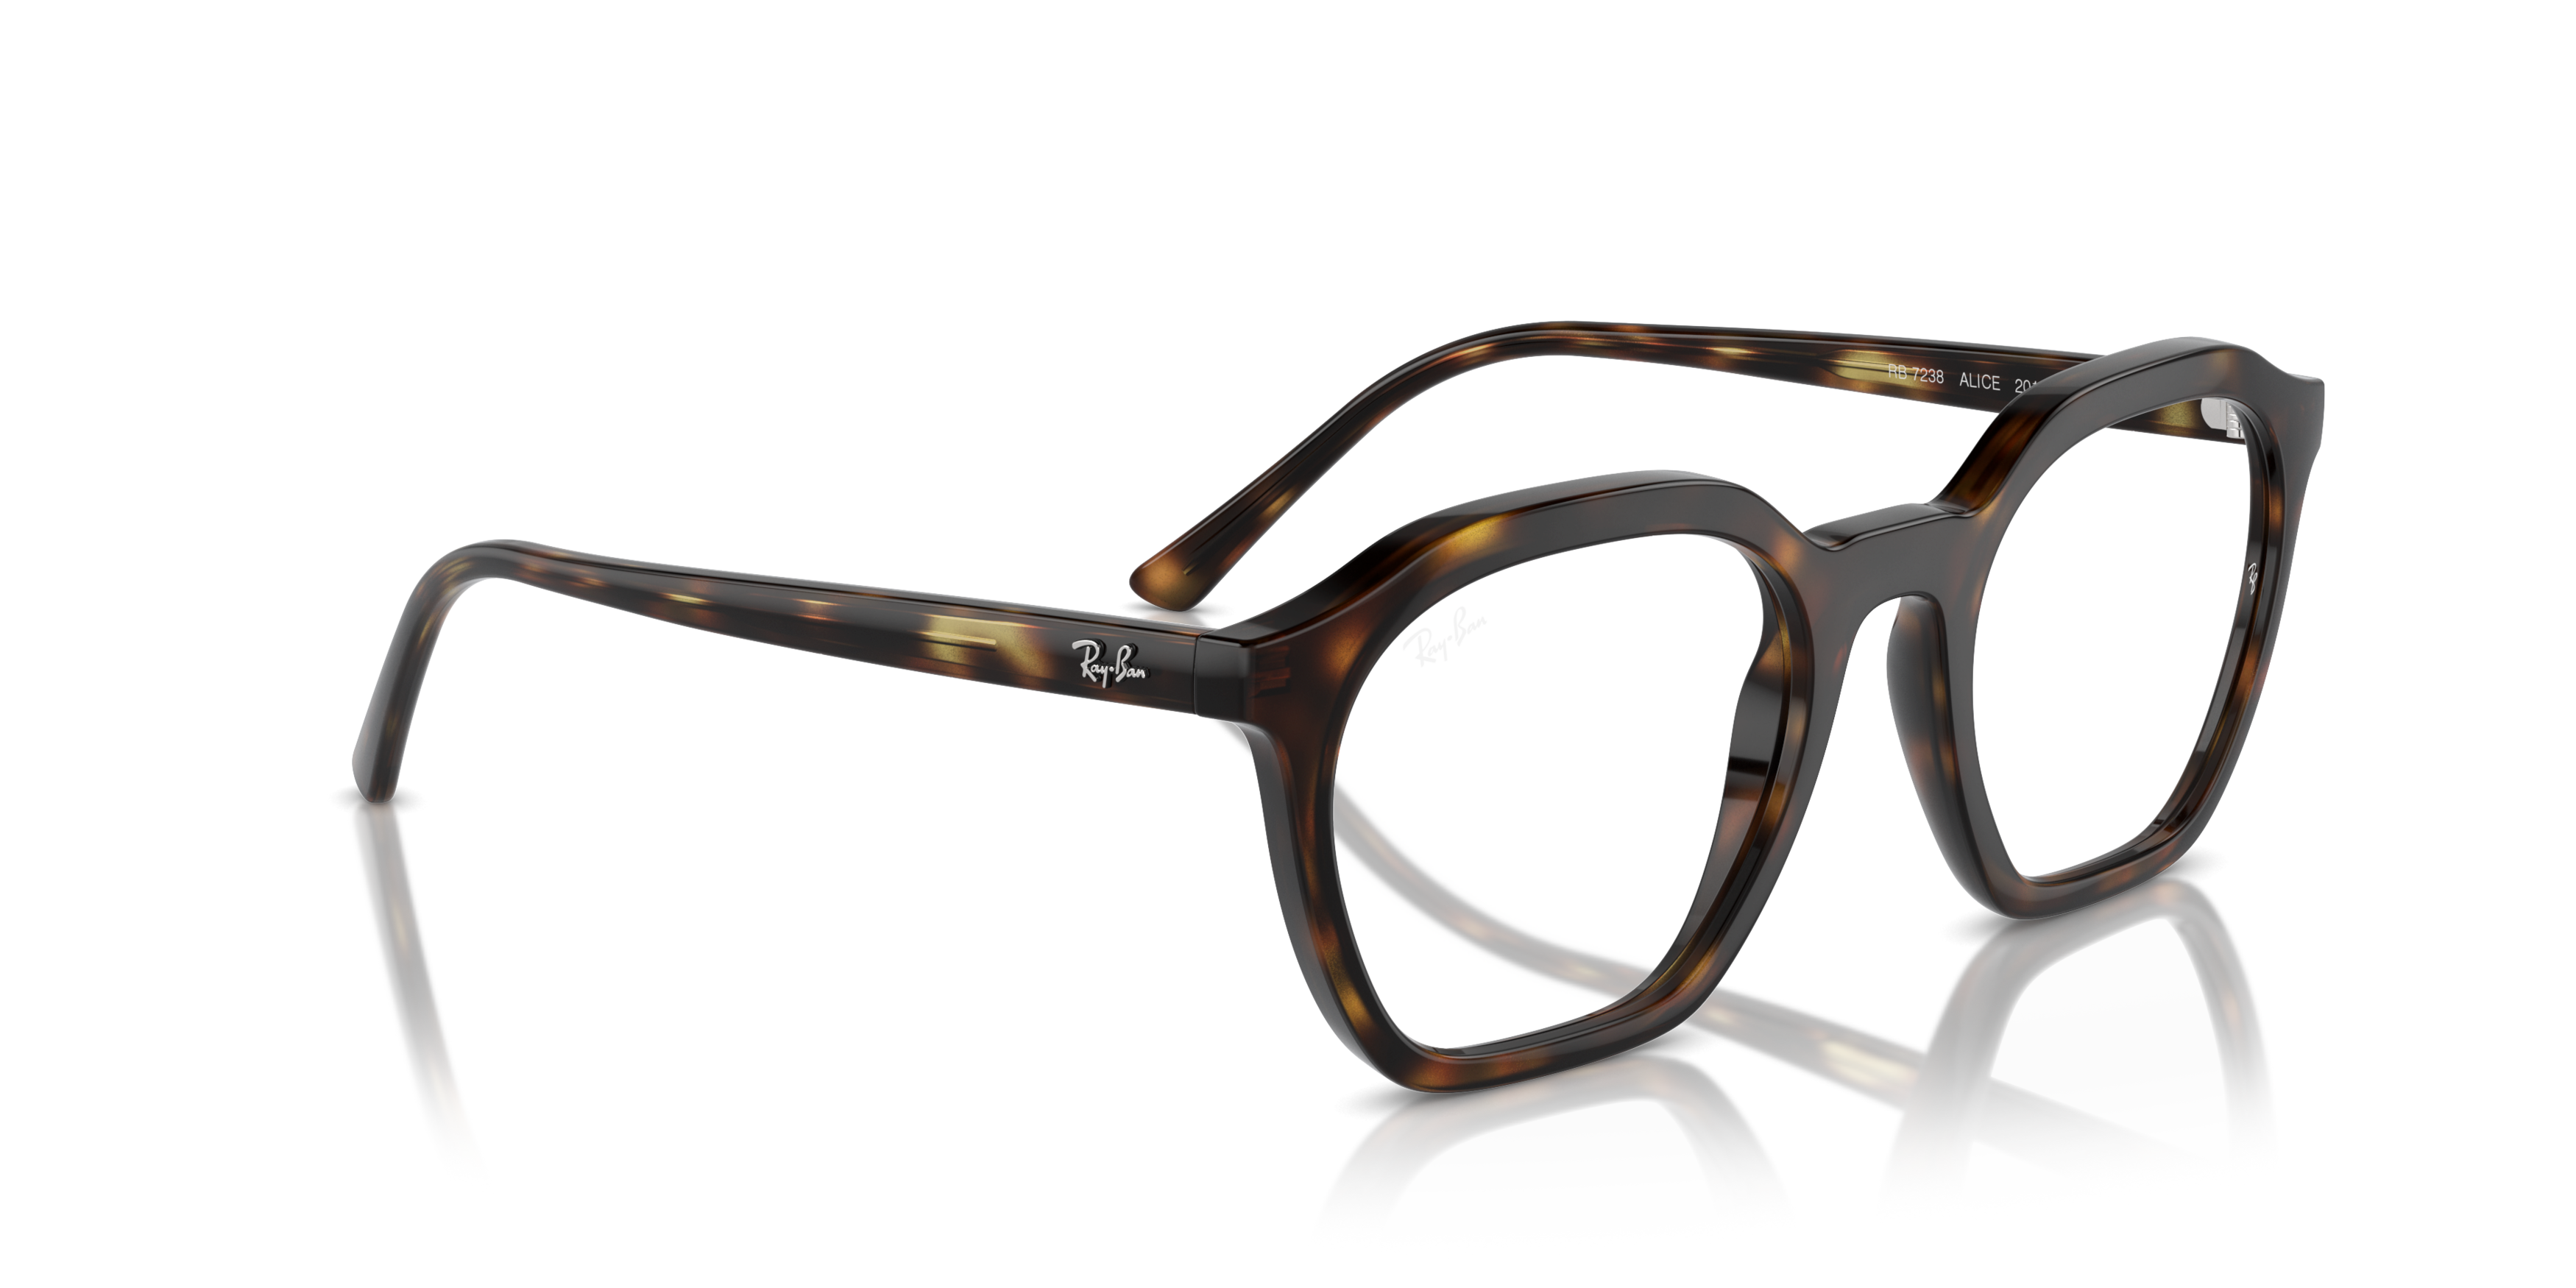 Angle_Right01 Ray-Ban RX 7238 Glasses Transparent / Black